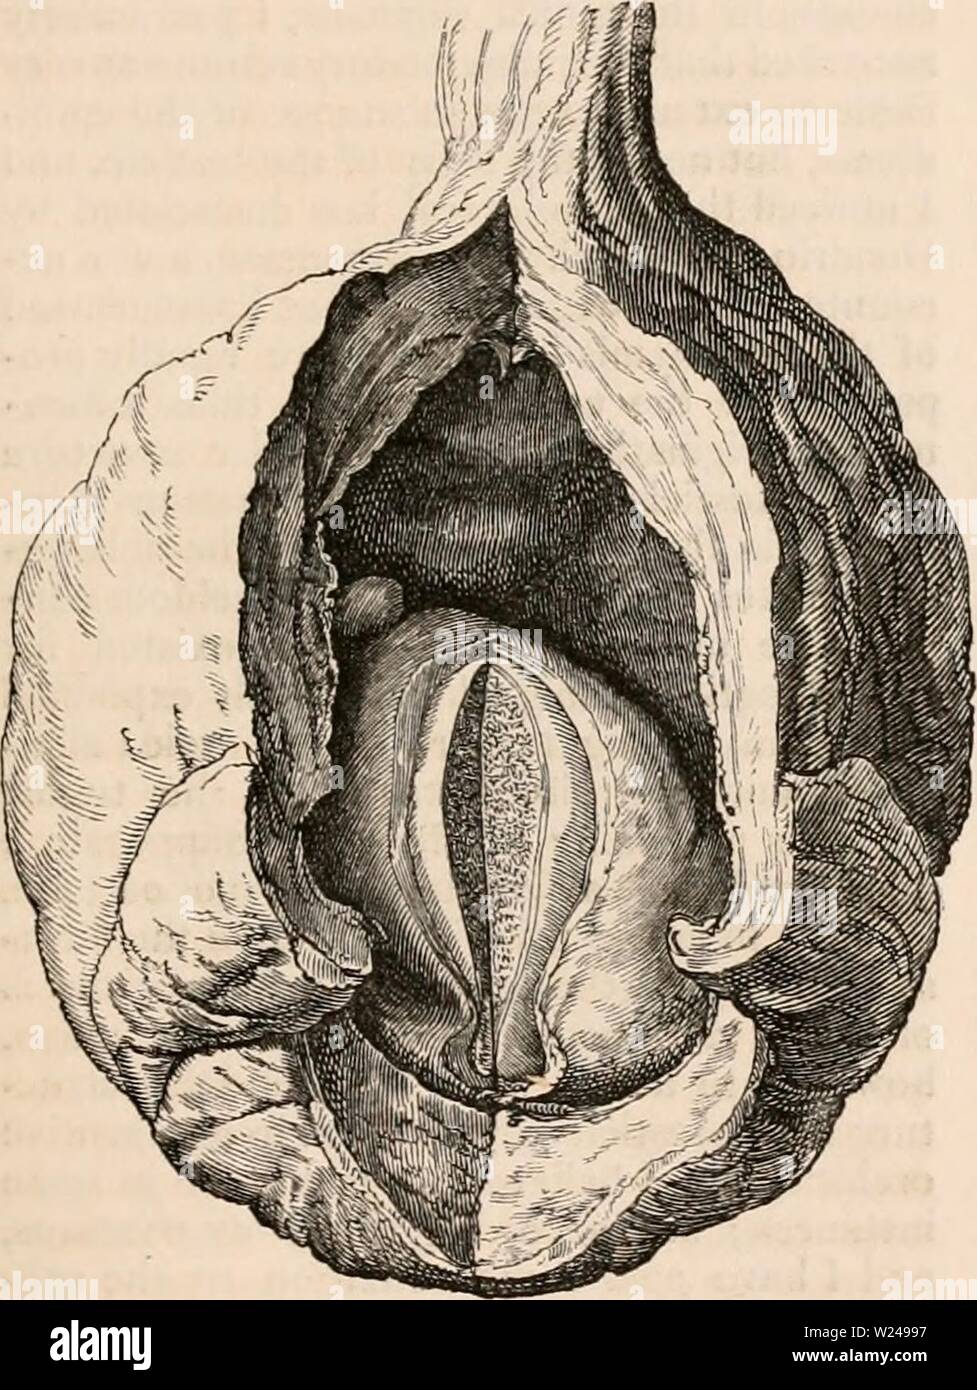 Archive image from page 218 of The cyclopædia of anatomy and. The cyclopædia of anatomy and physiology  cyclopdiaofana0402todd Year: 1849  TESTICLE (ABNORMAL ANATOMY). glandular structure of the testicle sometimes disappears in the same manner as in old cases of hydrocele, atrophy being occasioned by the long continued pressure arising from the ex- travasated blood. Sir B. Brodie has recorded two cases of old hgematocele, in which the testicle was completely atrophied. In the examination of a large hasmatocele which had existed for many years, and was removed by operation, under the impression Stock Photo